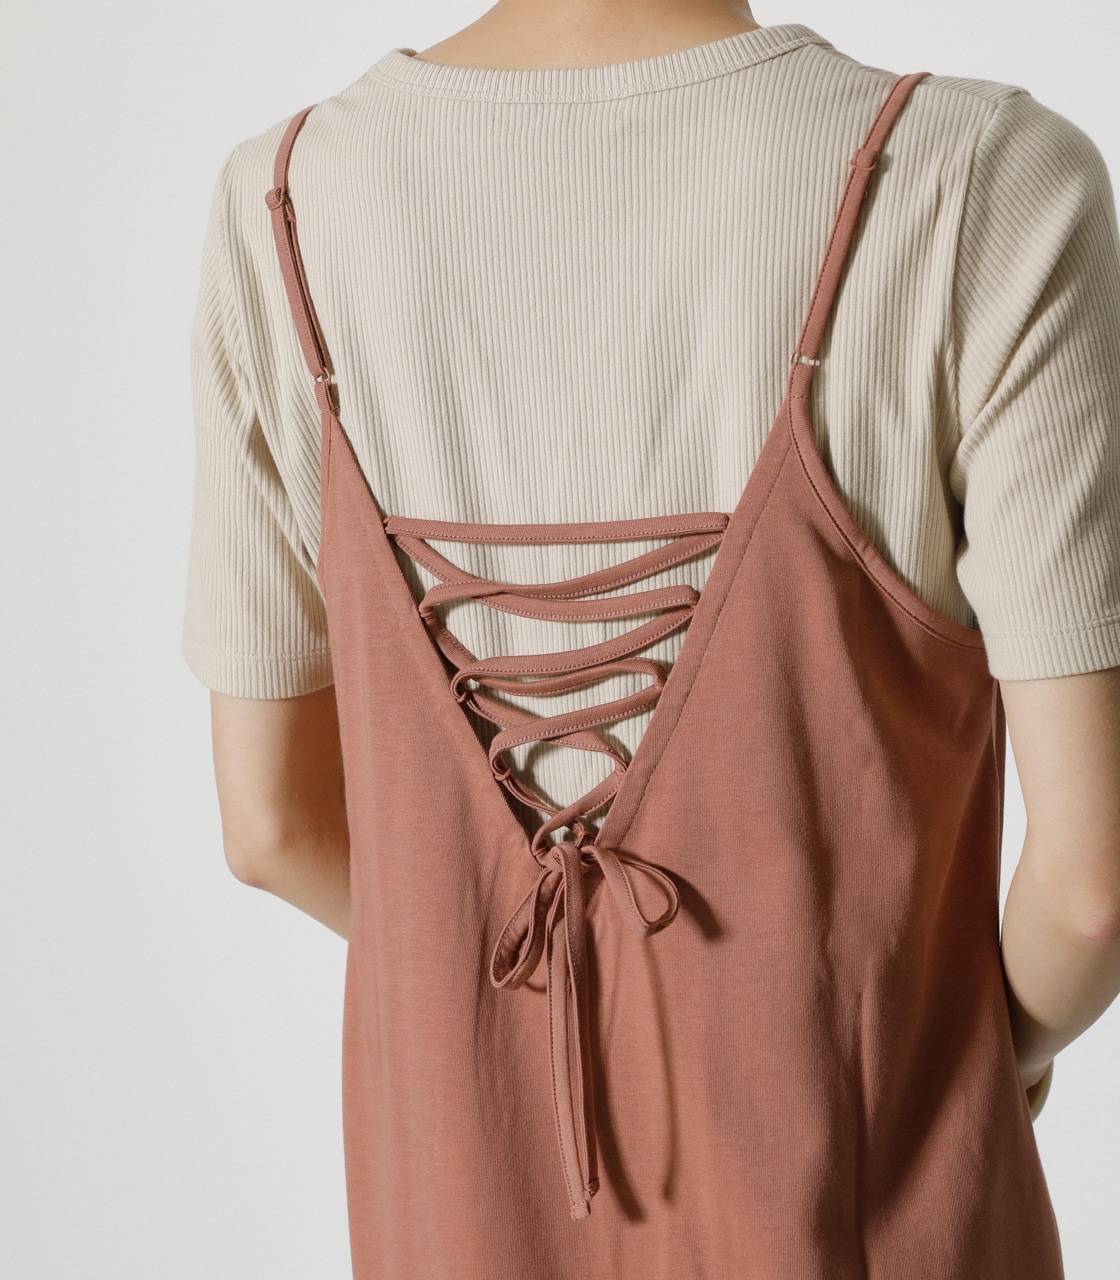 BACK LACE-UP CAMI ONEPIECE/バックレースアップキャミワンピース 詳細画像 ORG 9